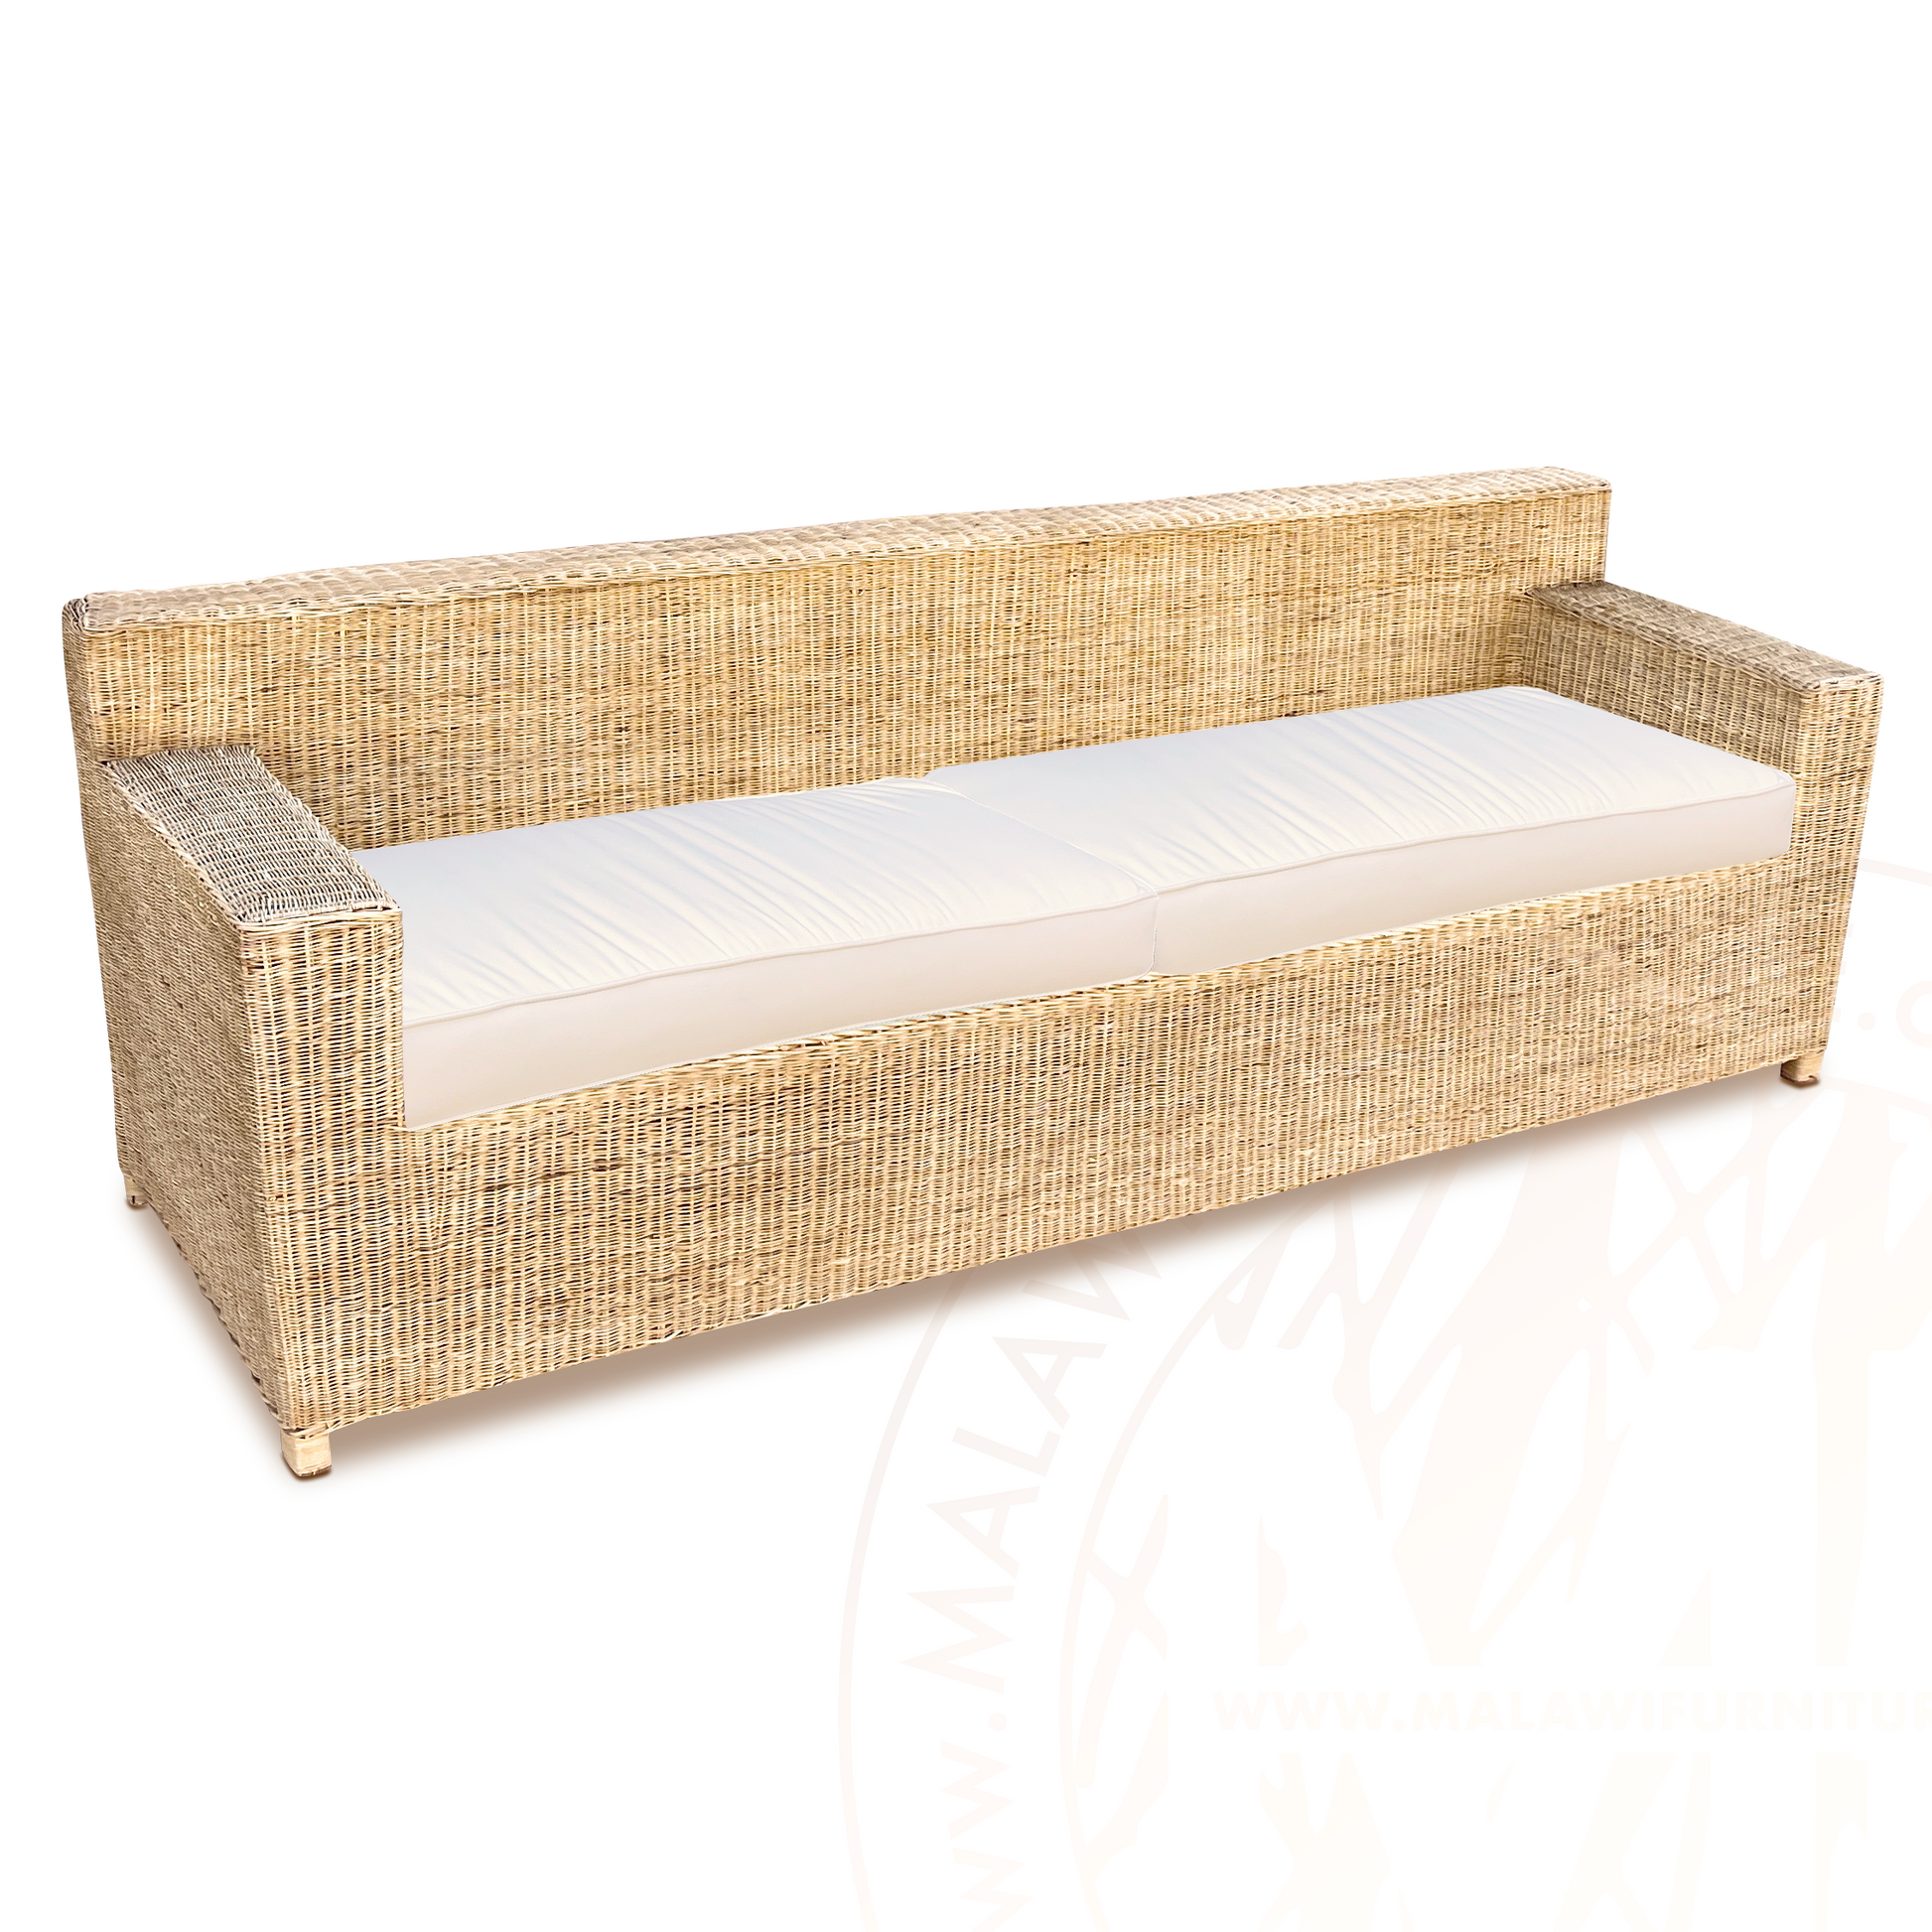 BOX Malawi Couch Set (Option 1) hand weaved woven rattan cane chair malawi with cushion